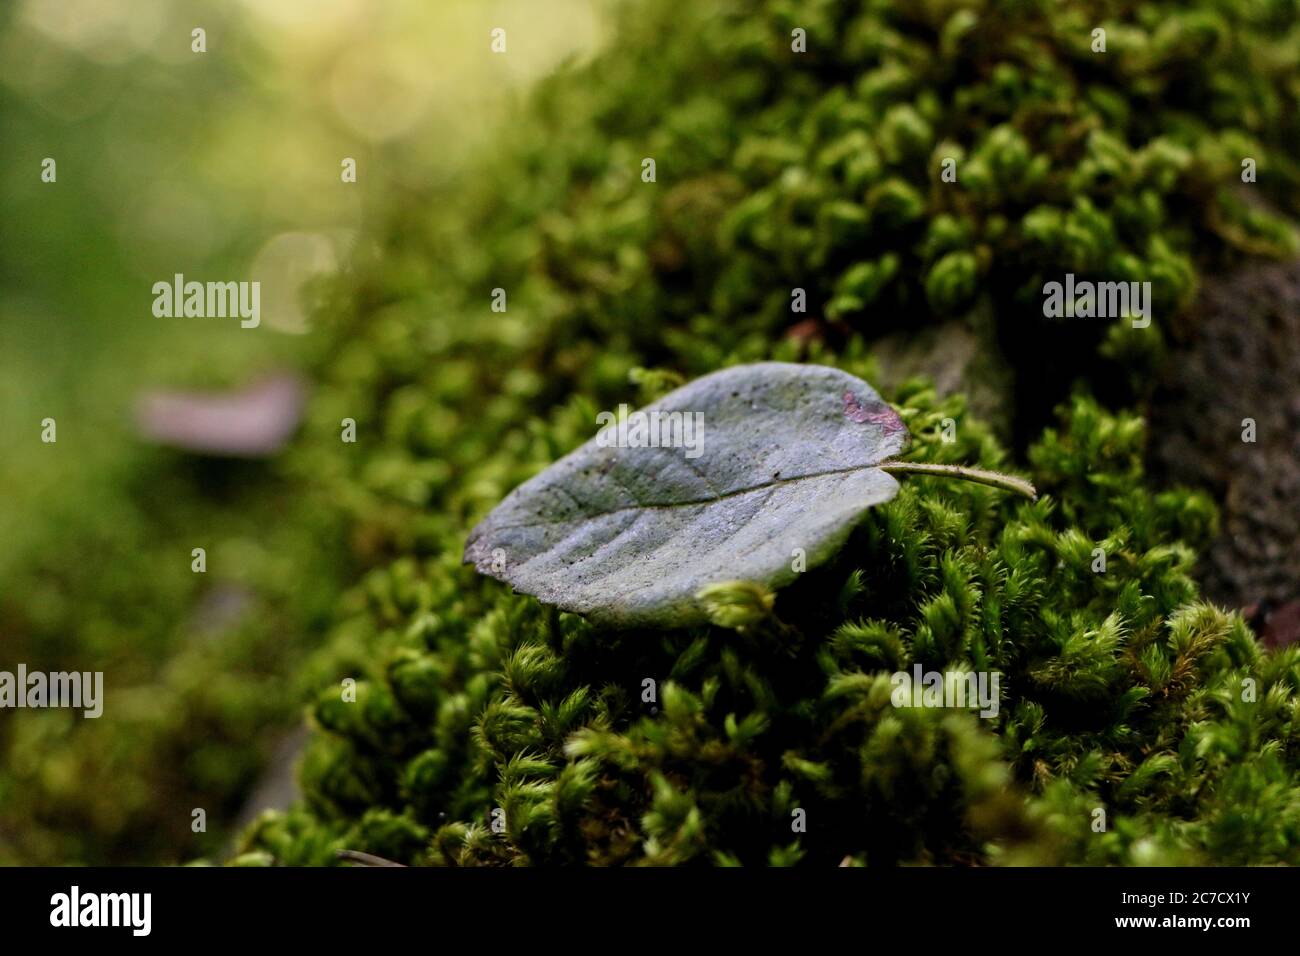 Closeup shot of a green leaf on a mossy ground with a blurred background Stock Photo